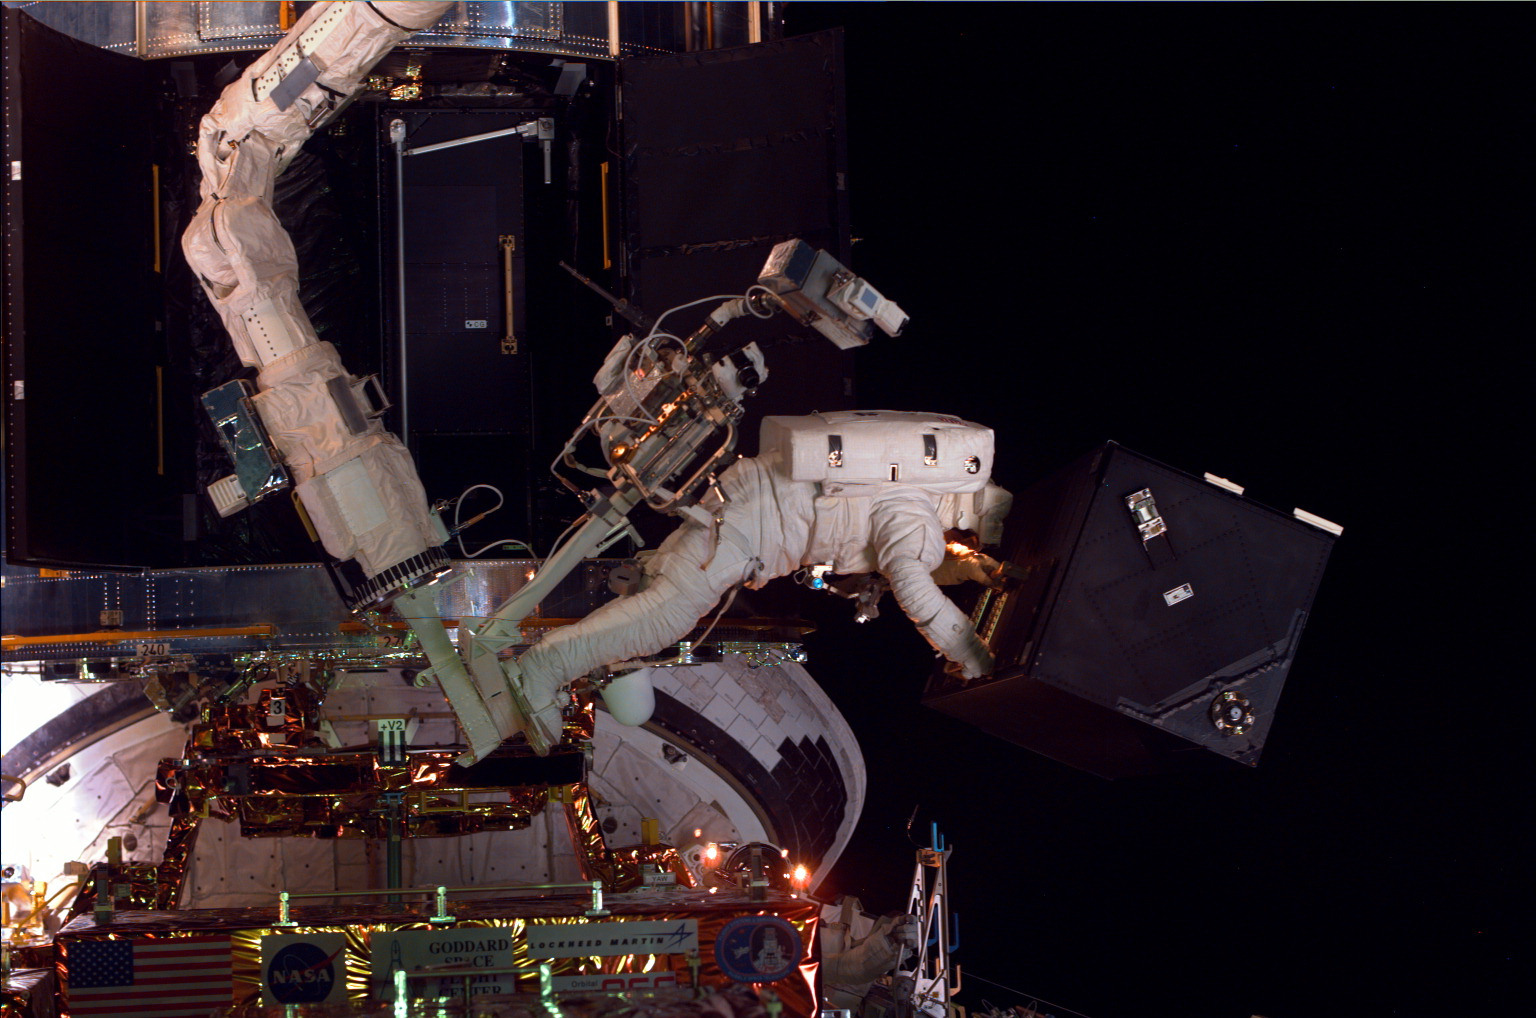 An astronaut on the end of the space shuttle's robotic CANADARM above the shuttle's cargo bay. He is holding Hubble's Faint Object Spectrograph, which looks like a large black box. Hubble is in the background.